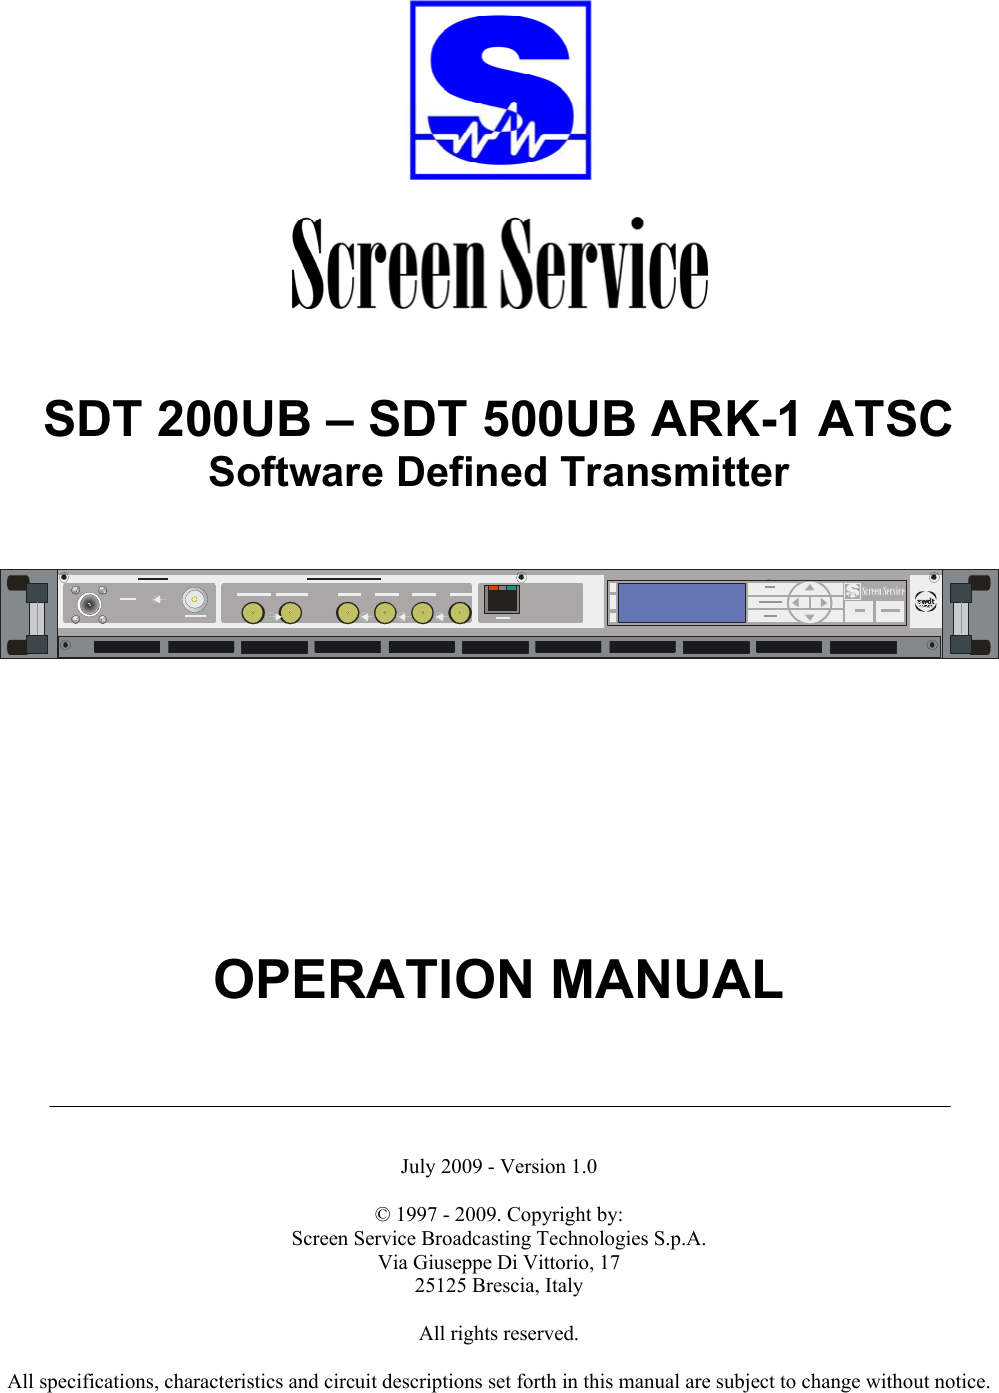      SDT 200UB – SDT 500UB ARK-1 ATSC Software Defined Transmitter    Screen Service             OPERATION MANUAL       July 2009 - Version 1.0  © 1997 - 2009. Copyright by:  Screen Service Broadcasting Technologies S.p.A. Via Giuseppe Di Vittorio, 17 25125 Brescia, Italy  All rights reserved.  All specifications, characteristics and circuit descriptions set forth in this manual are subject to change without notice. 